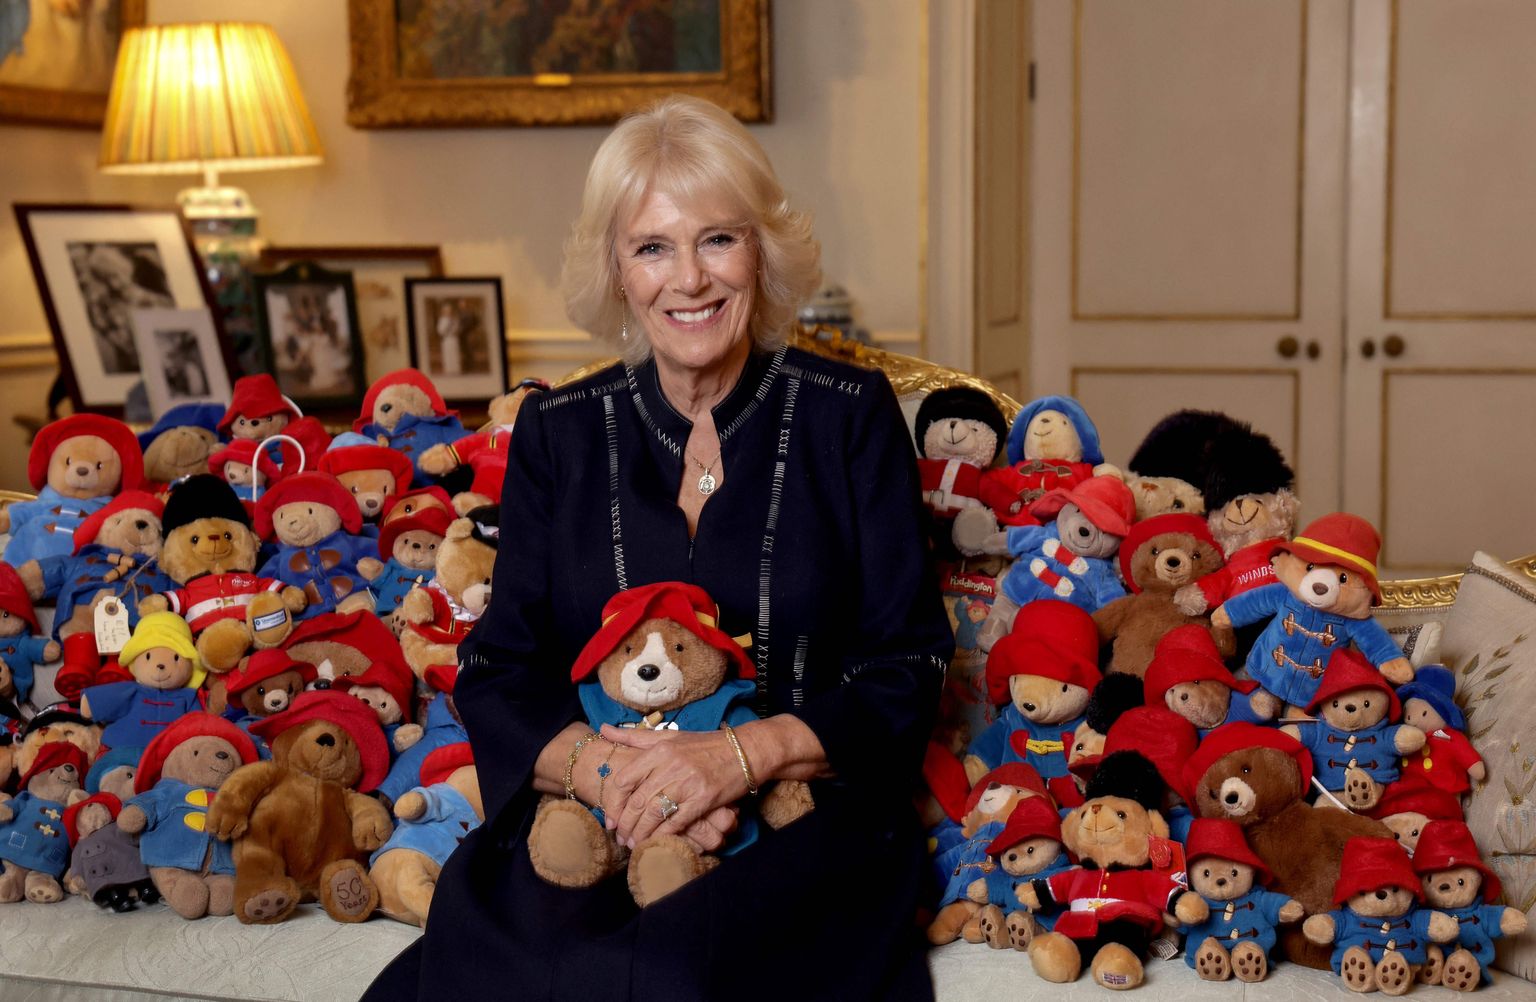 TOPSHOT - A Buckingham Palace handout image released on October 16, 2022, shows Britain's Camilla, Queen Consort posing with a collection of Paddington teddy bears in the Morning Room at the Clarence House, in London, on the 64th anniversary of the publication of the first Paddington bear book, on October 13, 2022. - More than 1,000 Paddingtons and other teddy bears left by mourners following Queen Elizabeth II's death are being donated to a leading children's charity, Buckingham Palace said October 15, 2022. Barnardo's will receive the professionally cleaned toys in the coming weeks after they were left outside royal residences in London and Windsor, along with a sea of flowers, after Elizabeth died on September 8. (Photo by CHRIS JACKSON / BUCKINGHAM PALACE / AFP) / RESTRICTED TO EDITORIAL USE - MANDATORY CREDIT "AFP PHOTO / HO / Buckingham Palace / CHRIS JACKSON / GETTY IMAGES" - NO MARKETING NO ADVERTISING CAMPAIGNS - DISTRIBUTED AS A SERVICE TO CLIENTS -  THE PHOTOGRAPH SHALL NOT BE USED AFTER OCTOBER 30th 2022. /